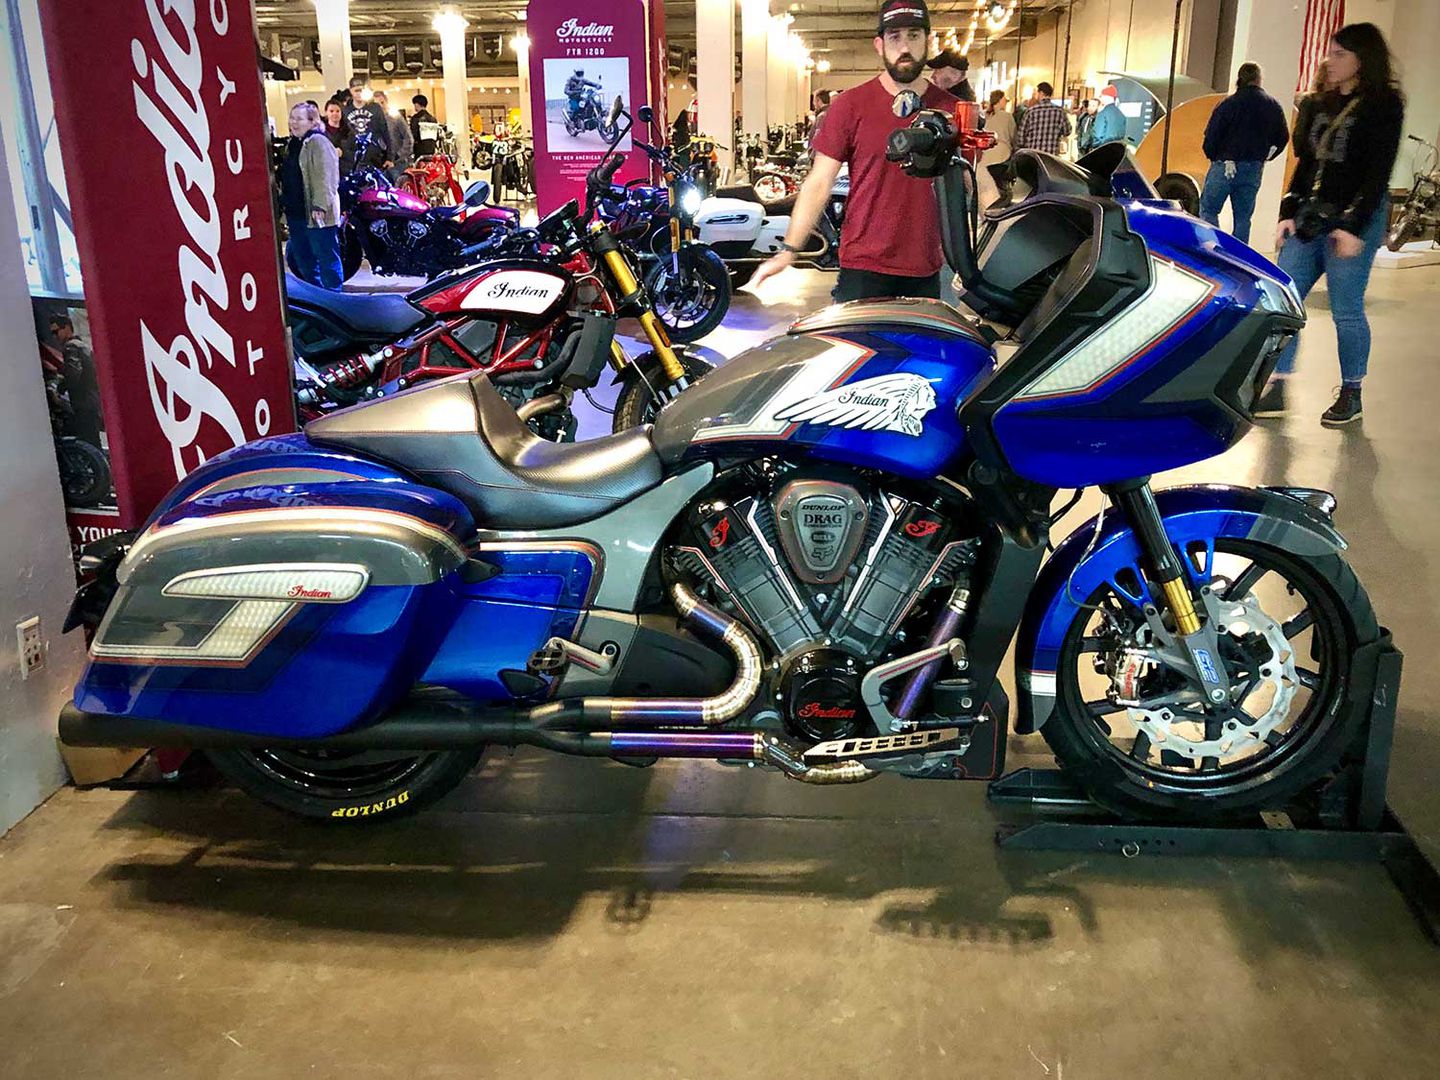 Pics of custom Challenger paint jobs or wraps: | Indian Motorcycle ...